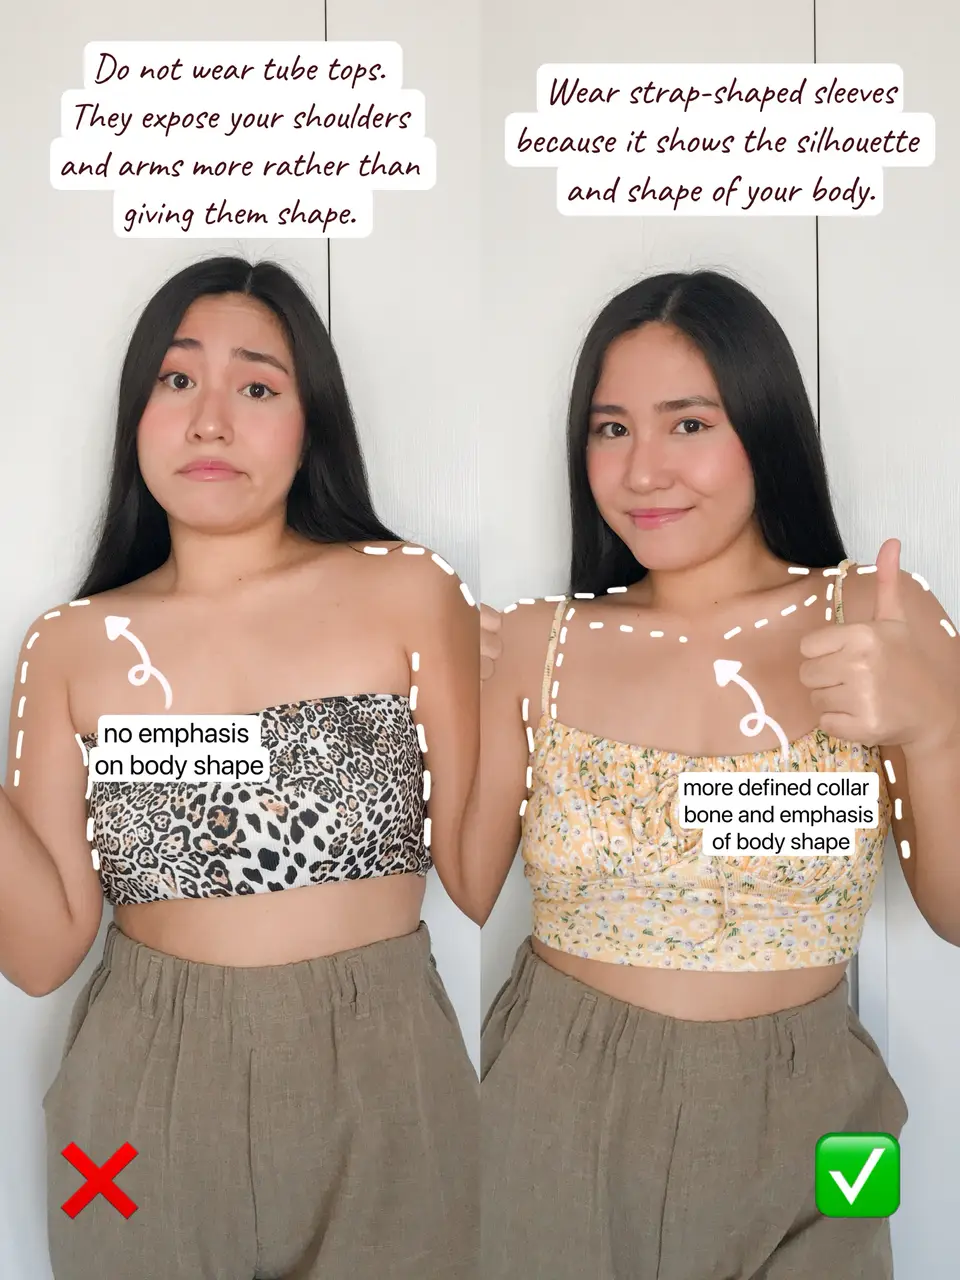 Thick Arms Problems? TIP: Wear Right Clothing, Gallery posted by Aizelle  💜